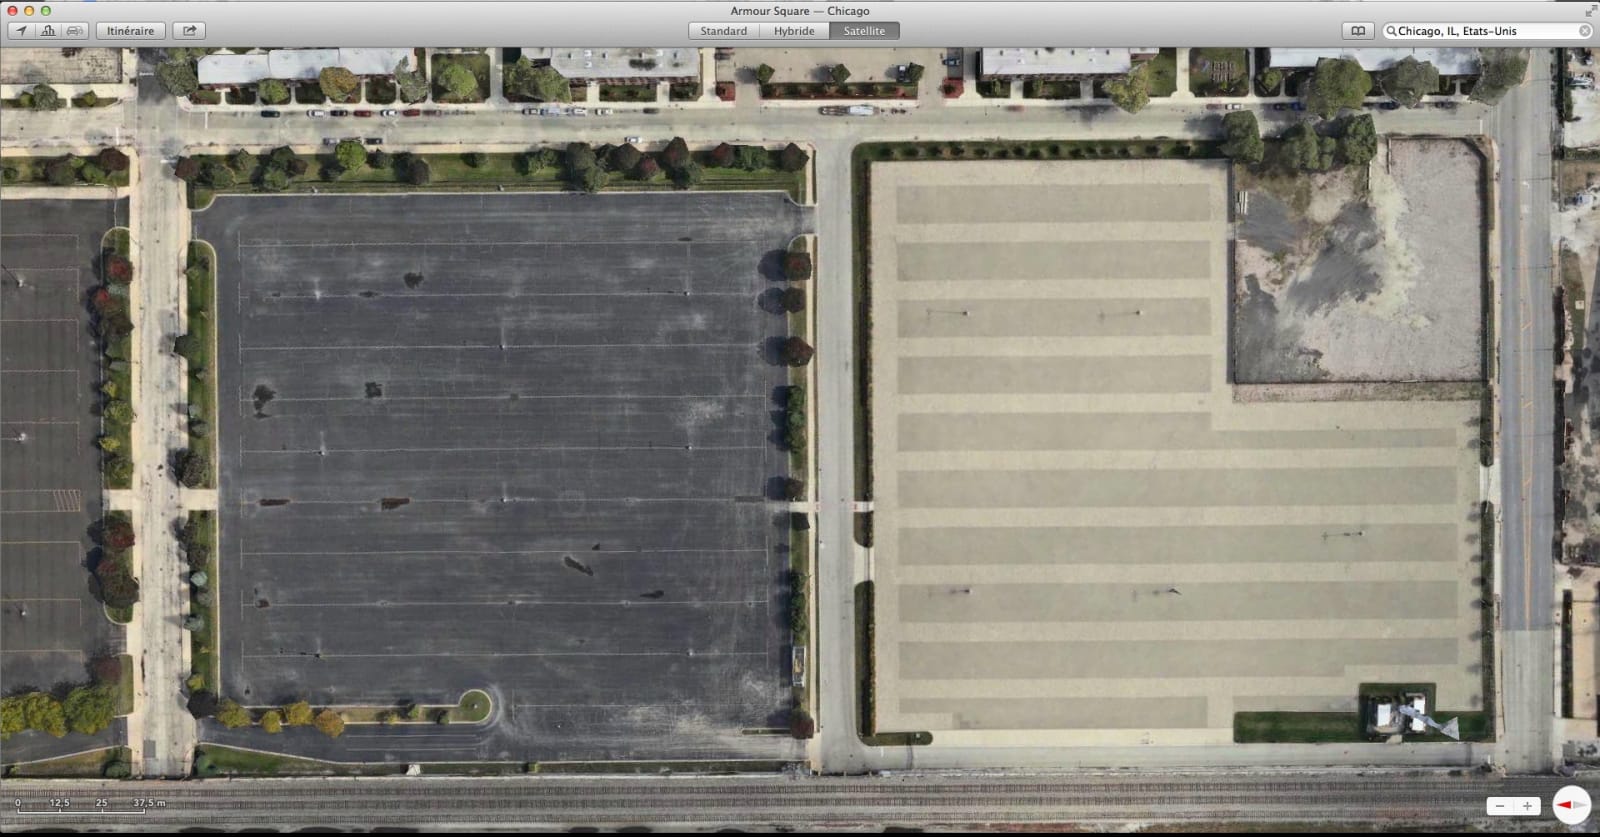 armour square, chicago - a satellite view of a parking square, with one side light grey and the other dark grey - parking square - paul lahana